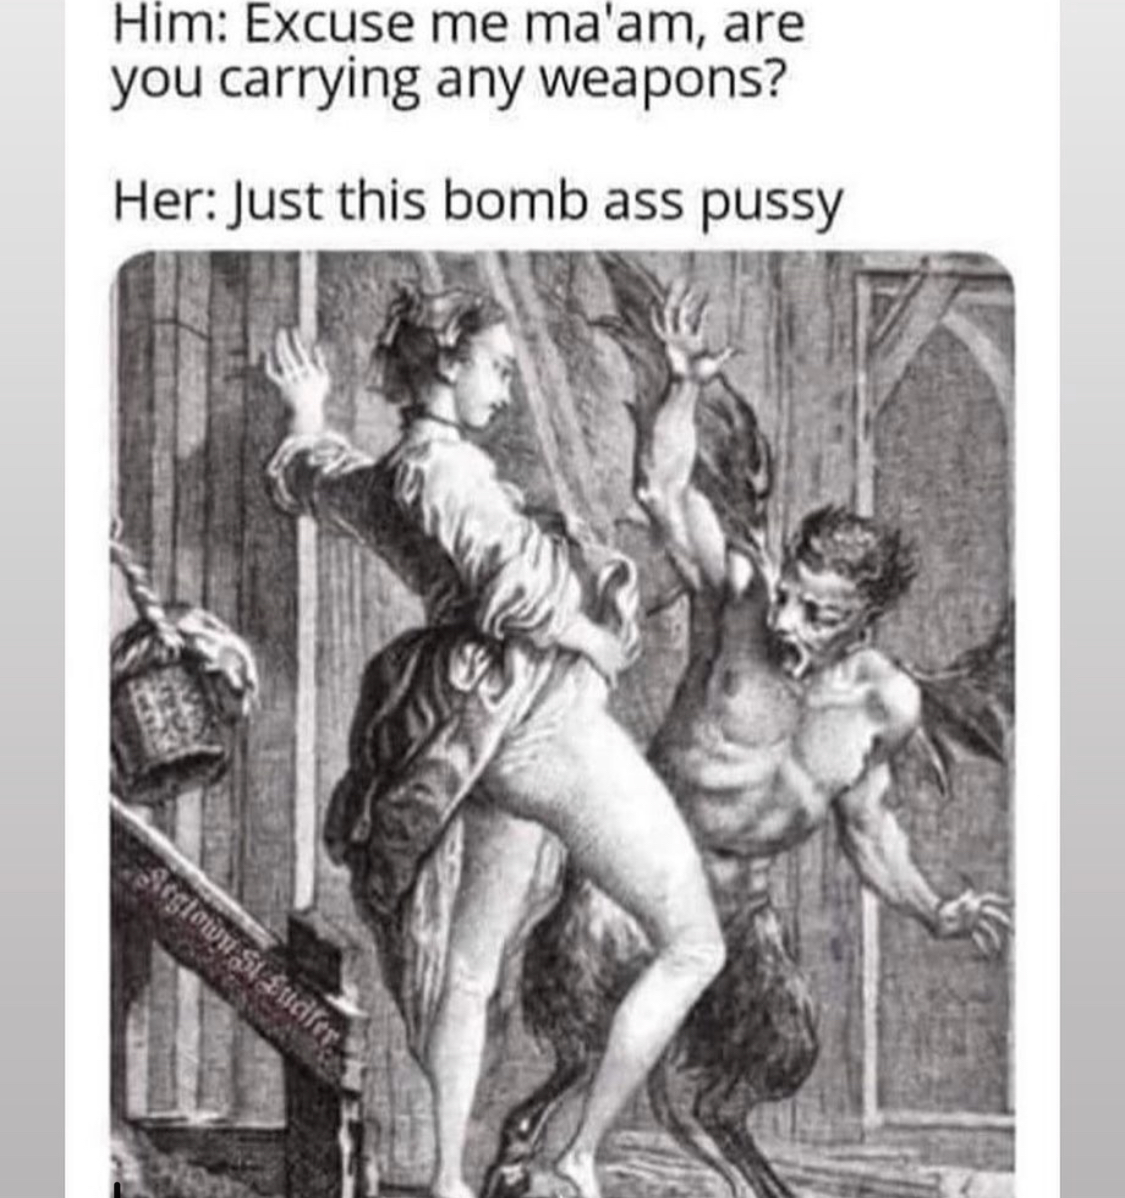 Weapons are this bomb ass pussy meme